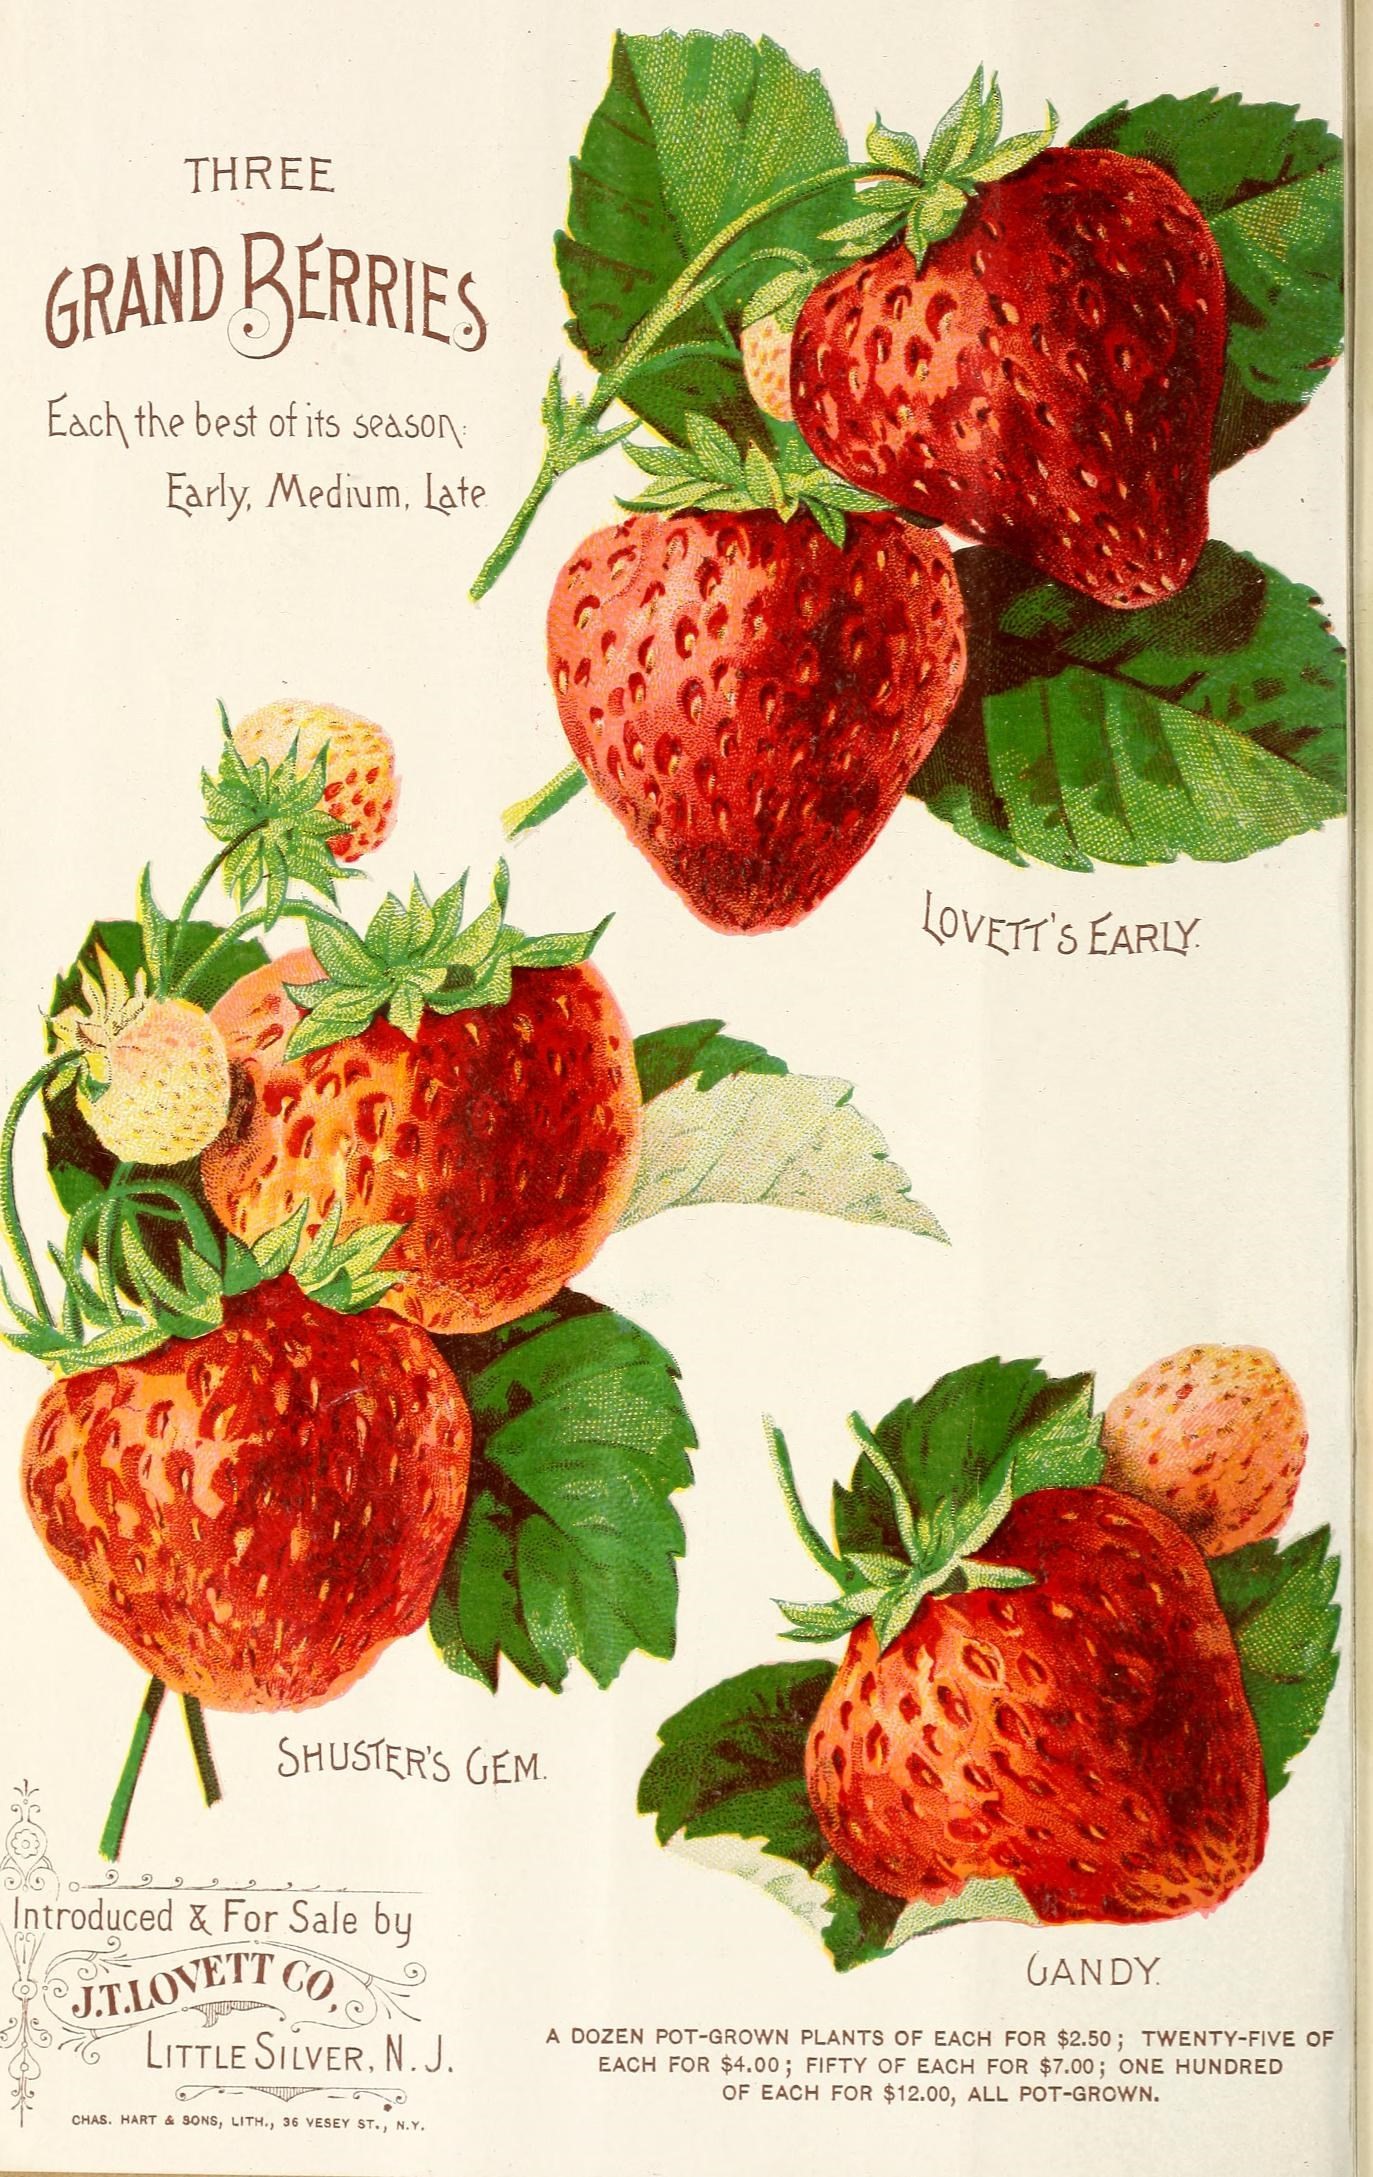 four drawings showing strawberries, one being red, the other green, in a white background